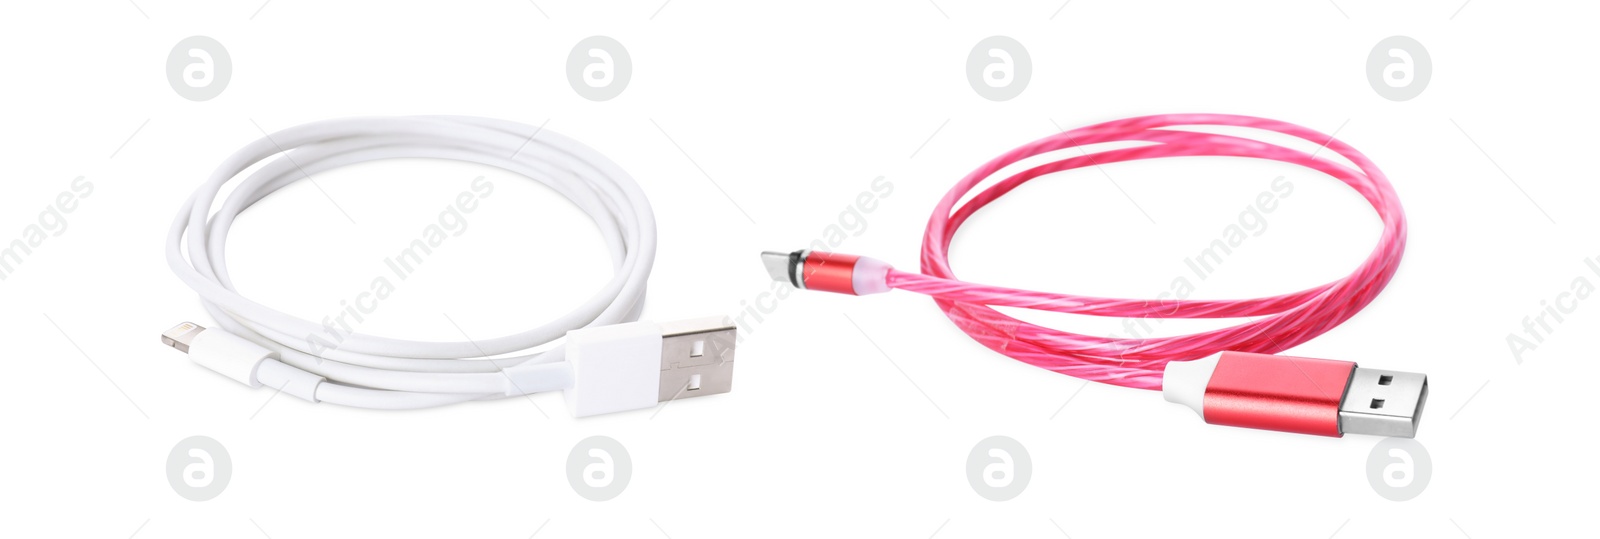 Image of USB cables with different connectors on white background